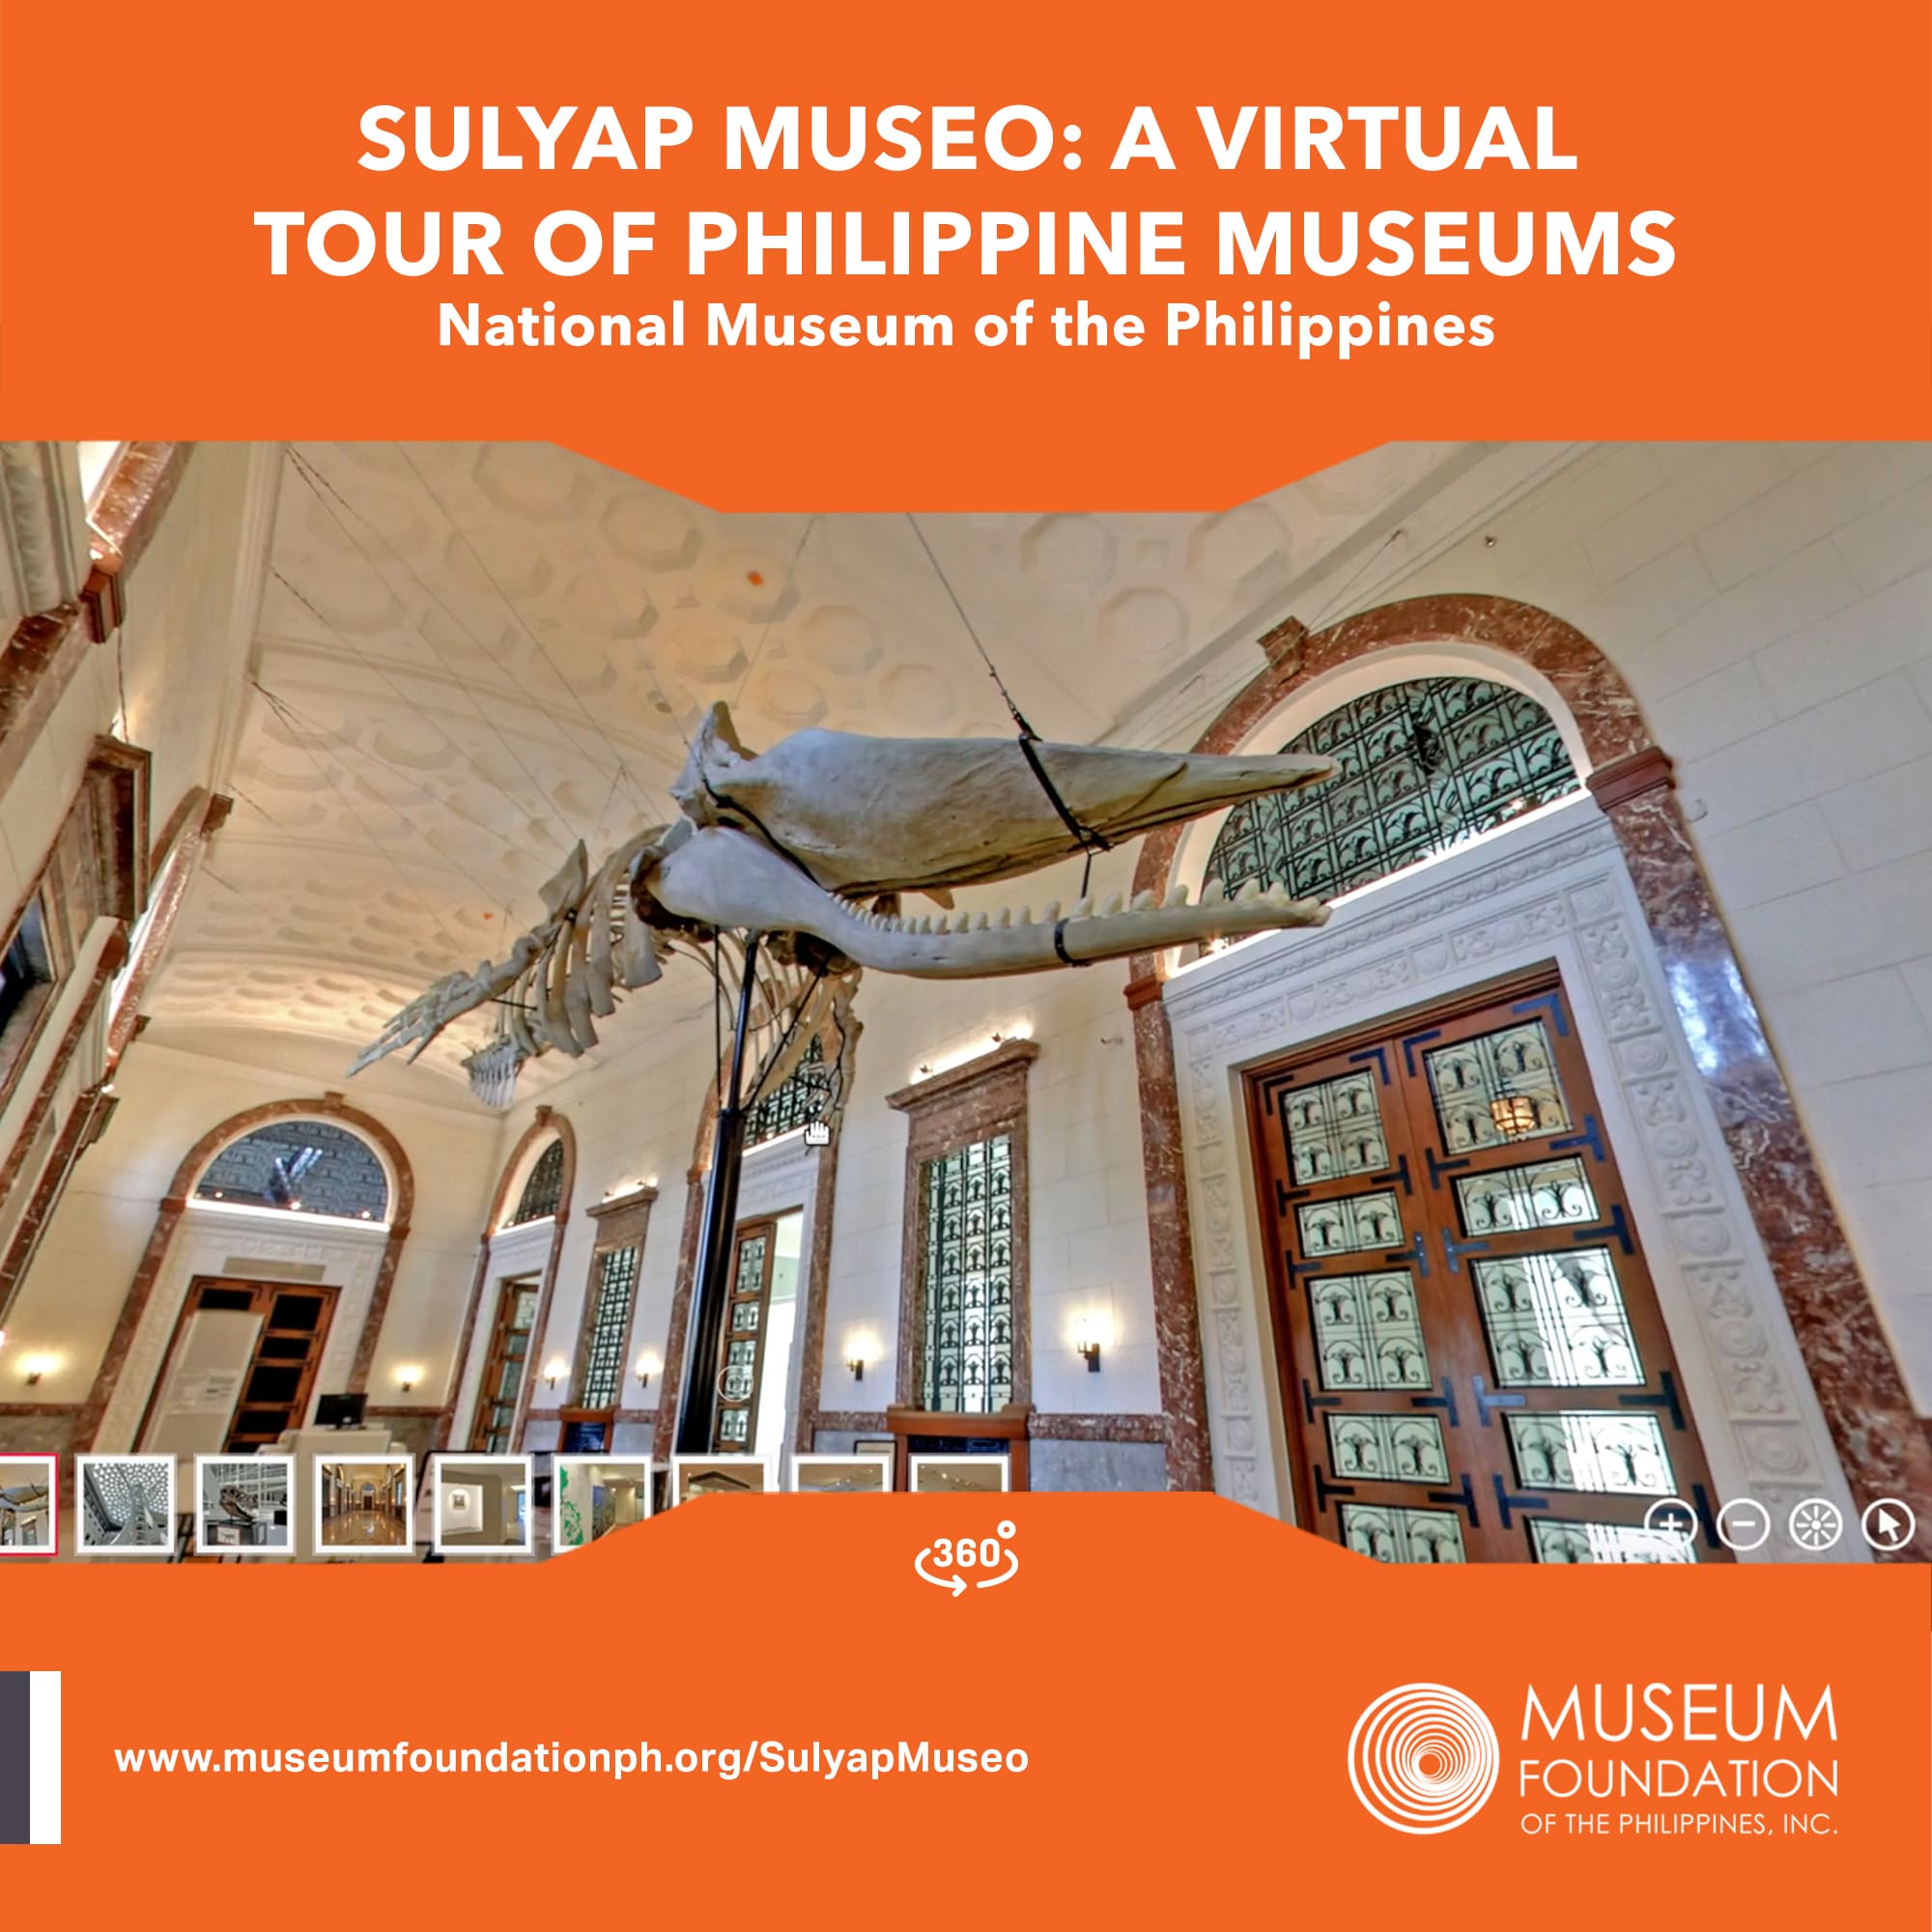 Sulyap Museo: A Virtual Tour of Philippine Museums